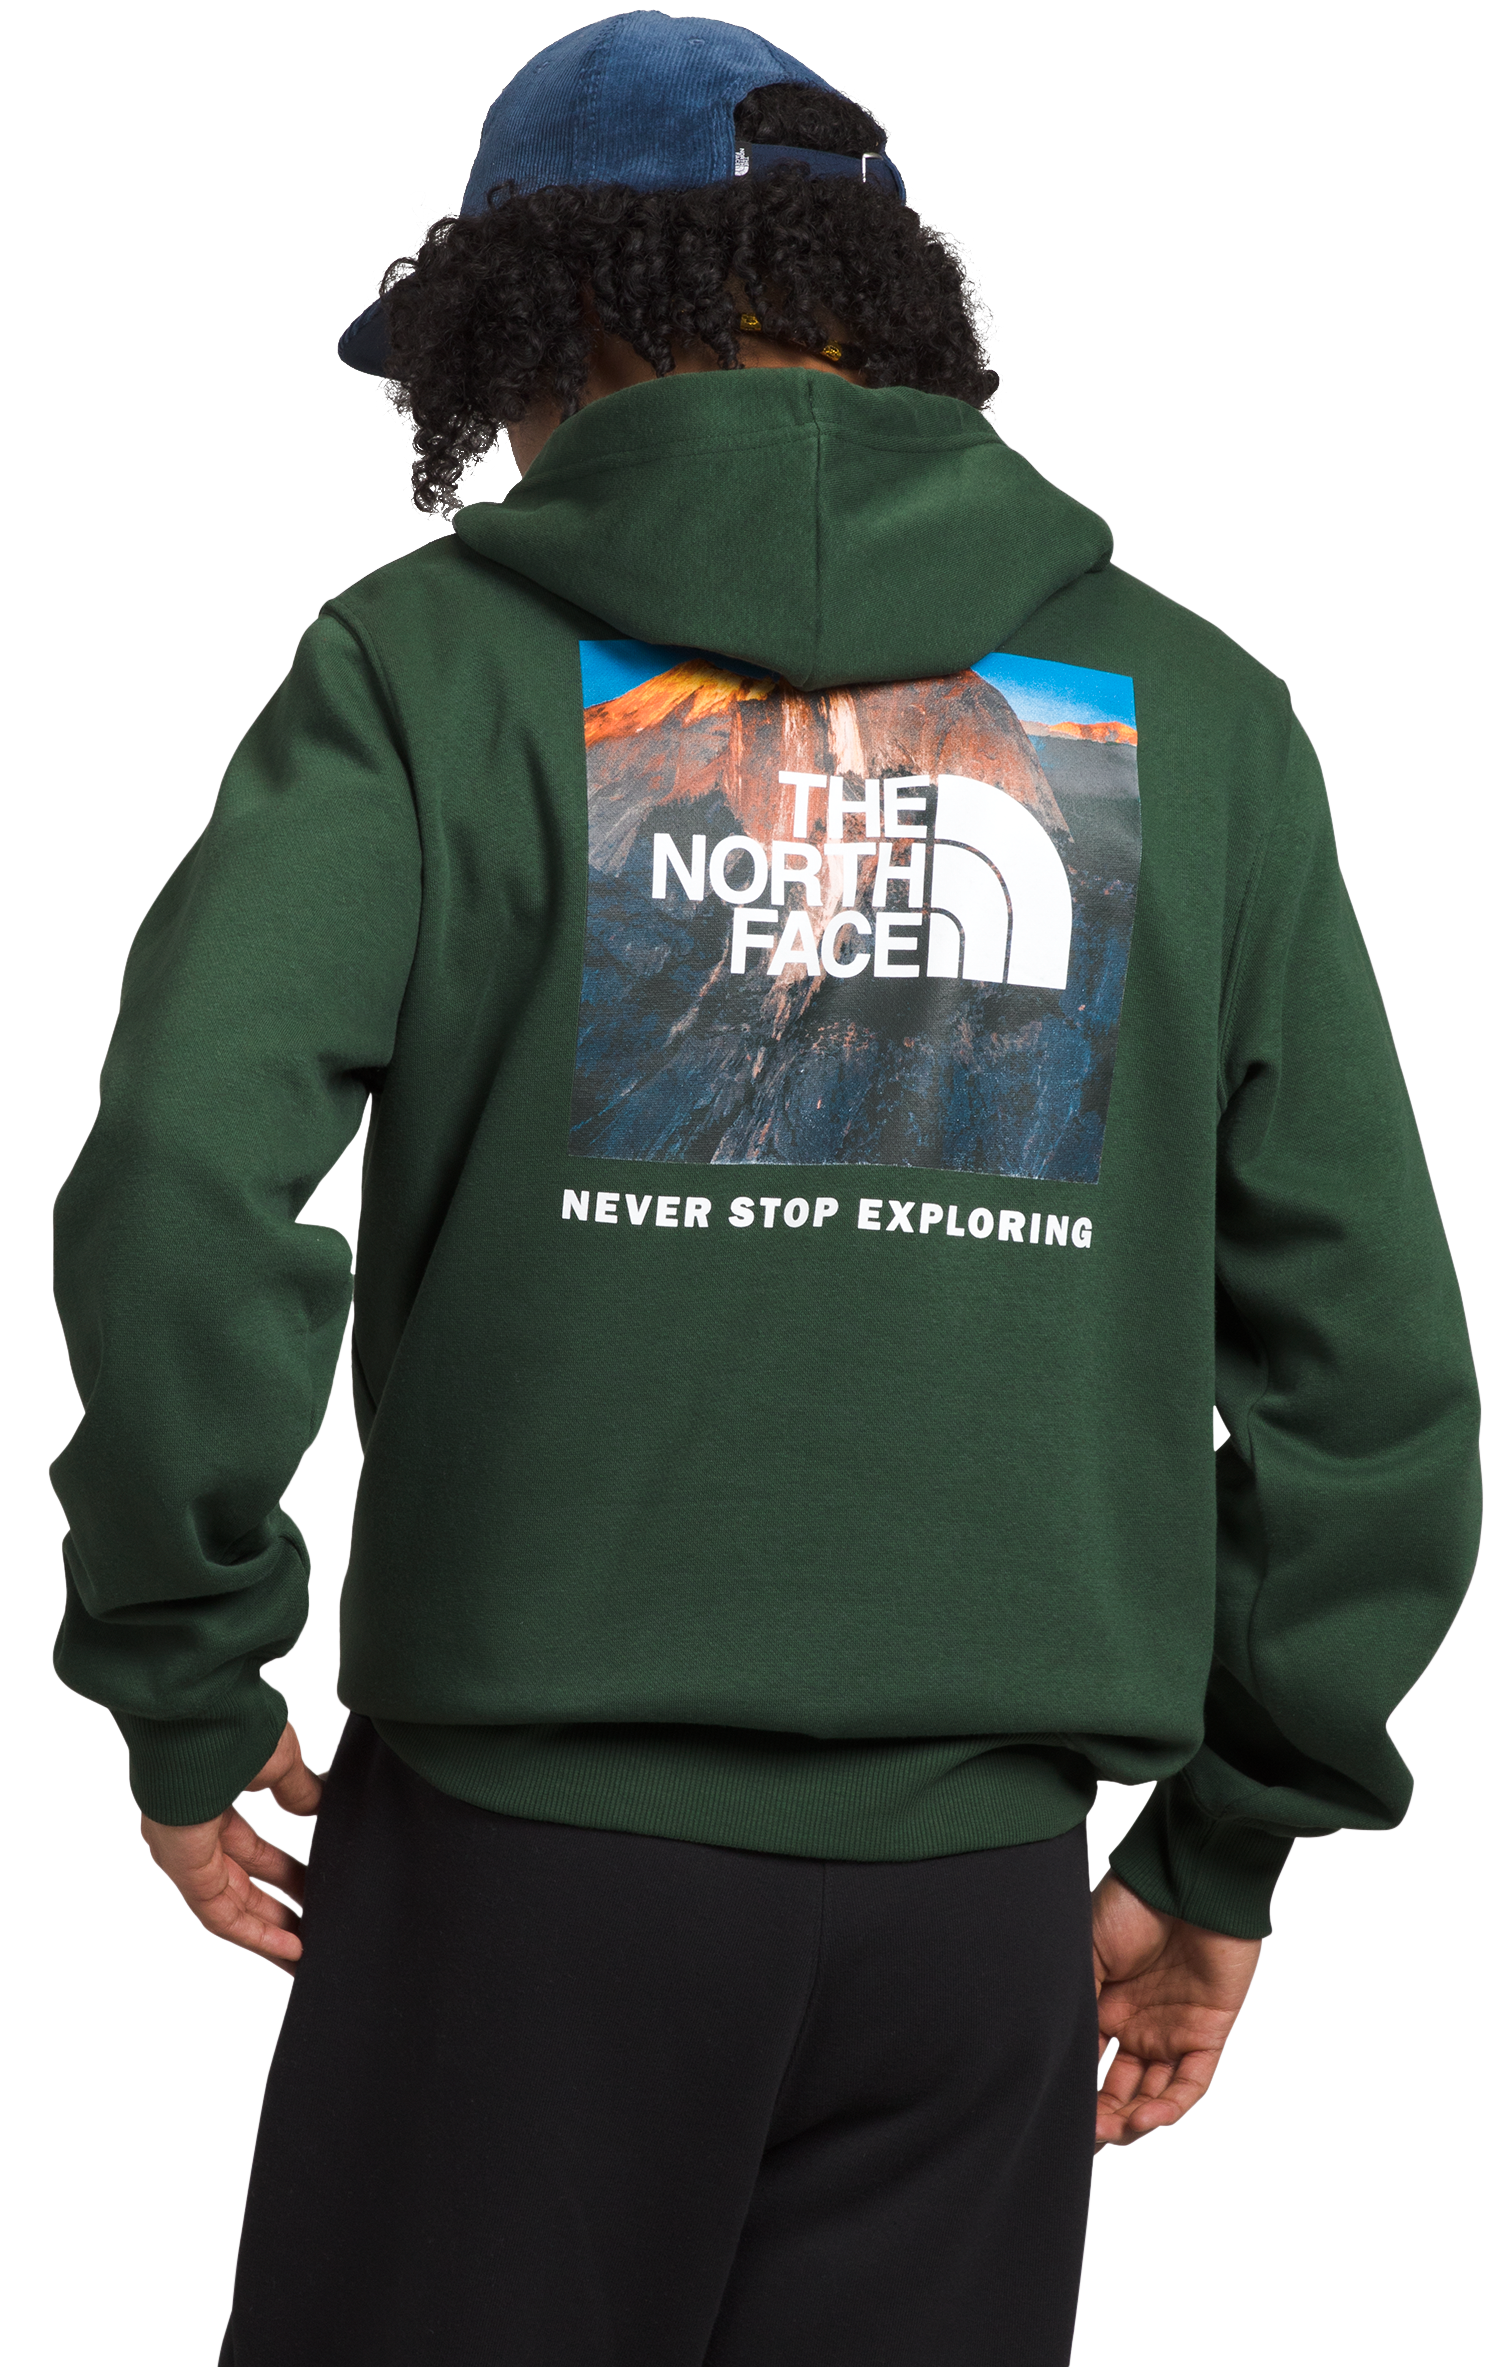 The North Face Box NSE Long-Sleeve Hoodie for Men - Pine Needle - M